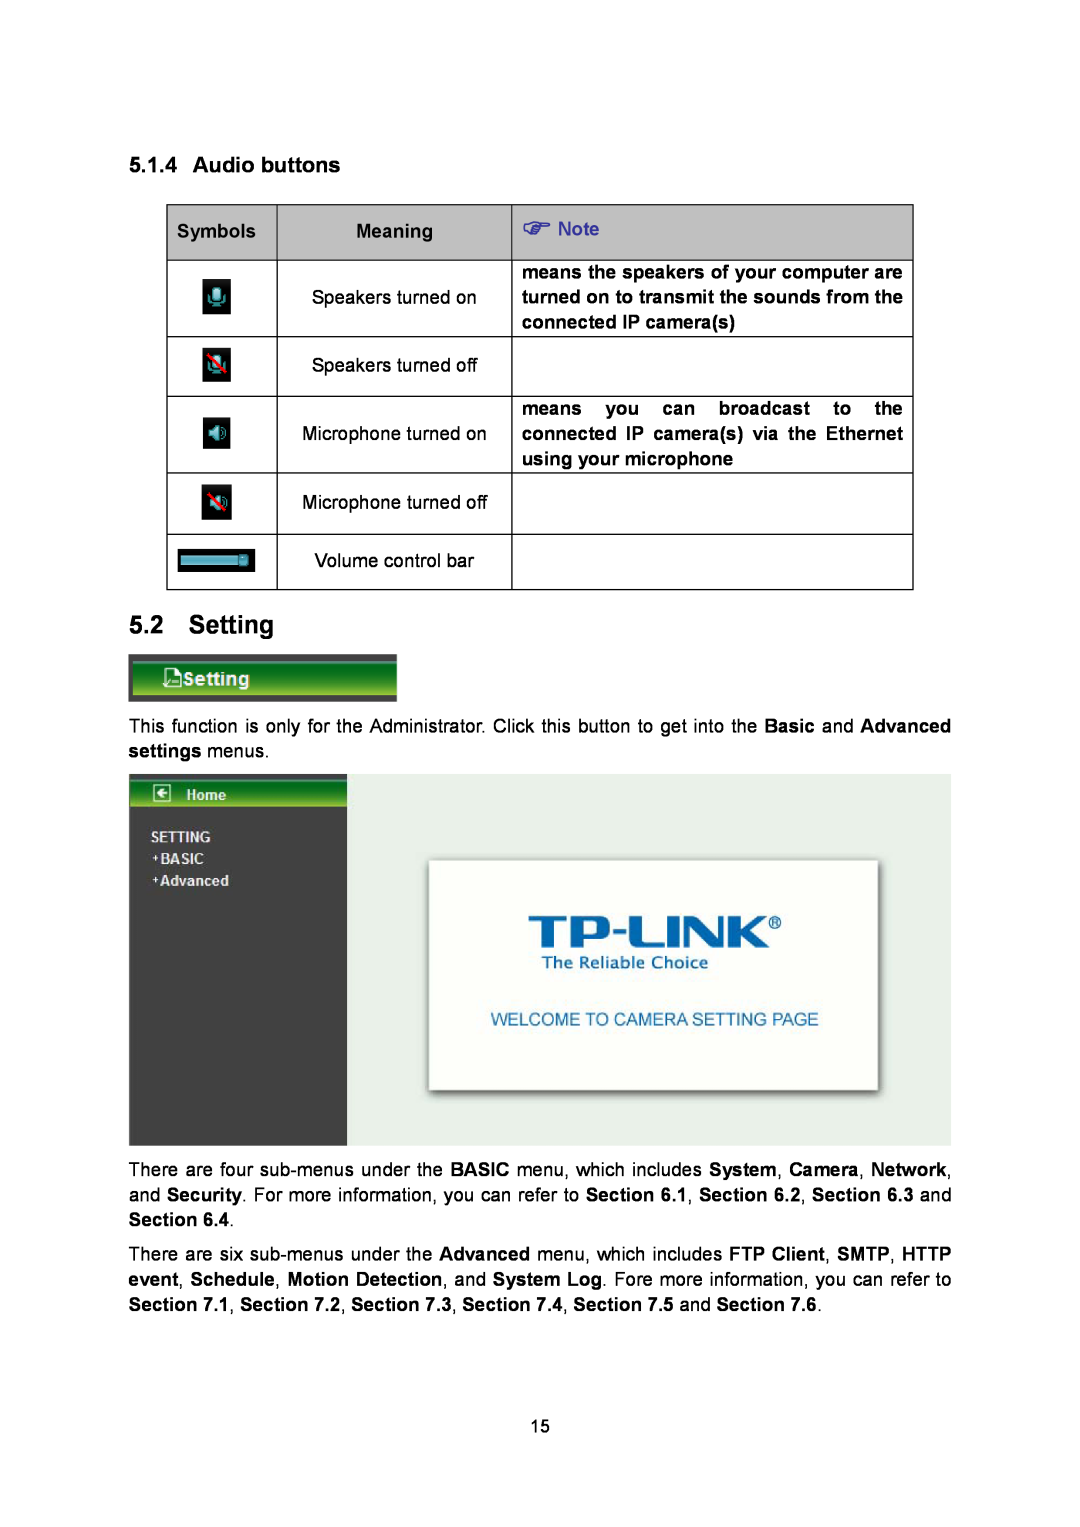 TP-Link TL-SC3130G Setting, Audio buttons, connected IP cameras, means you can broadcast to the, using your microphone 